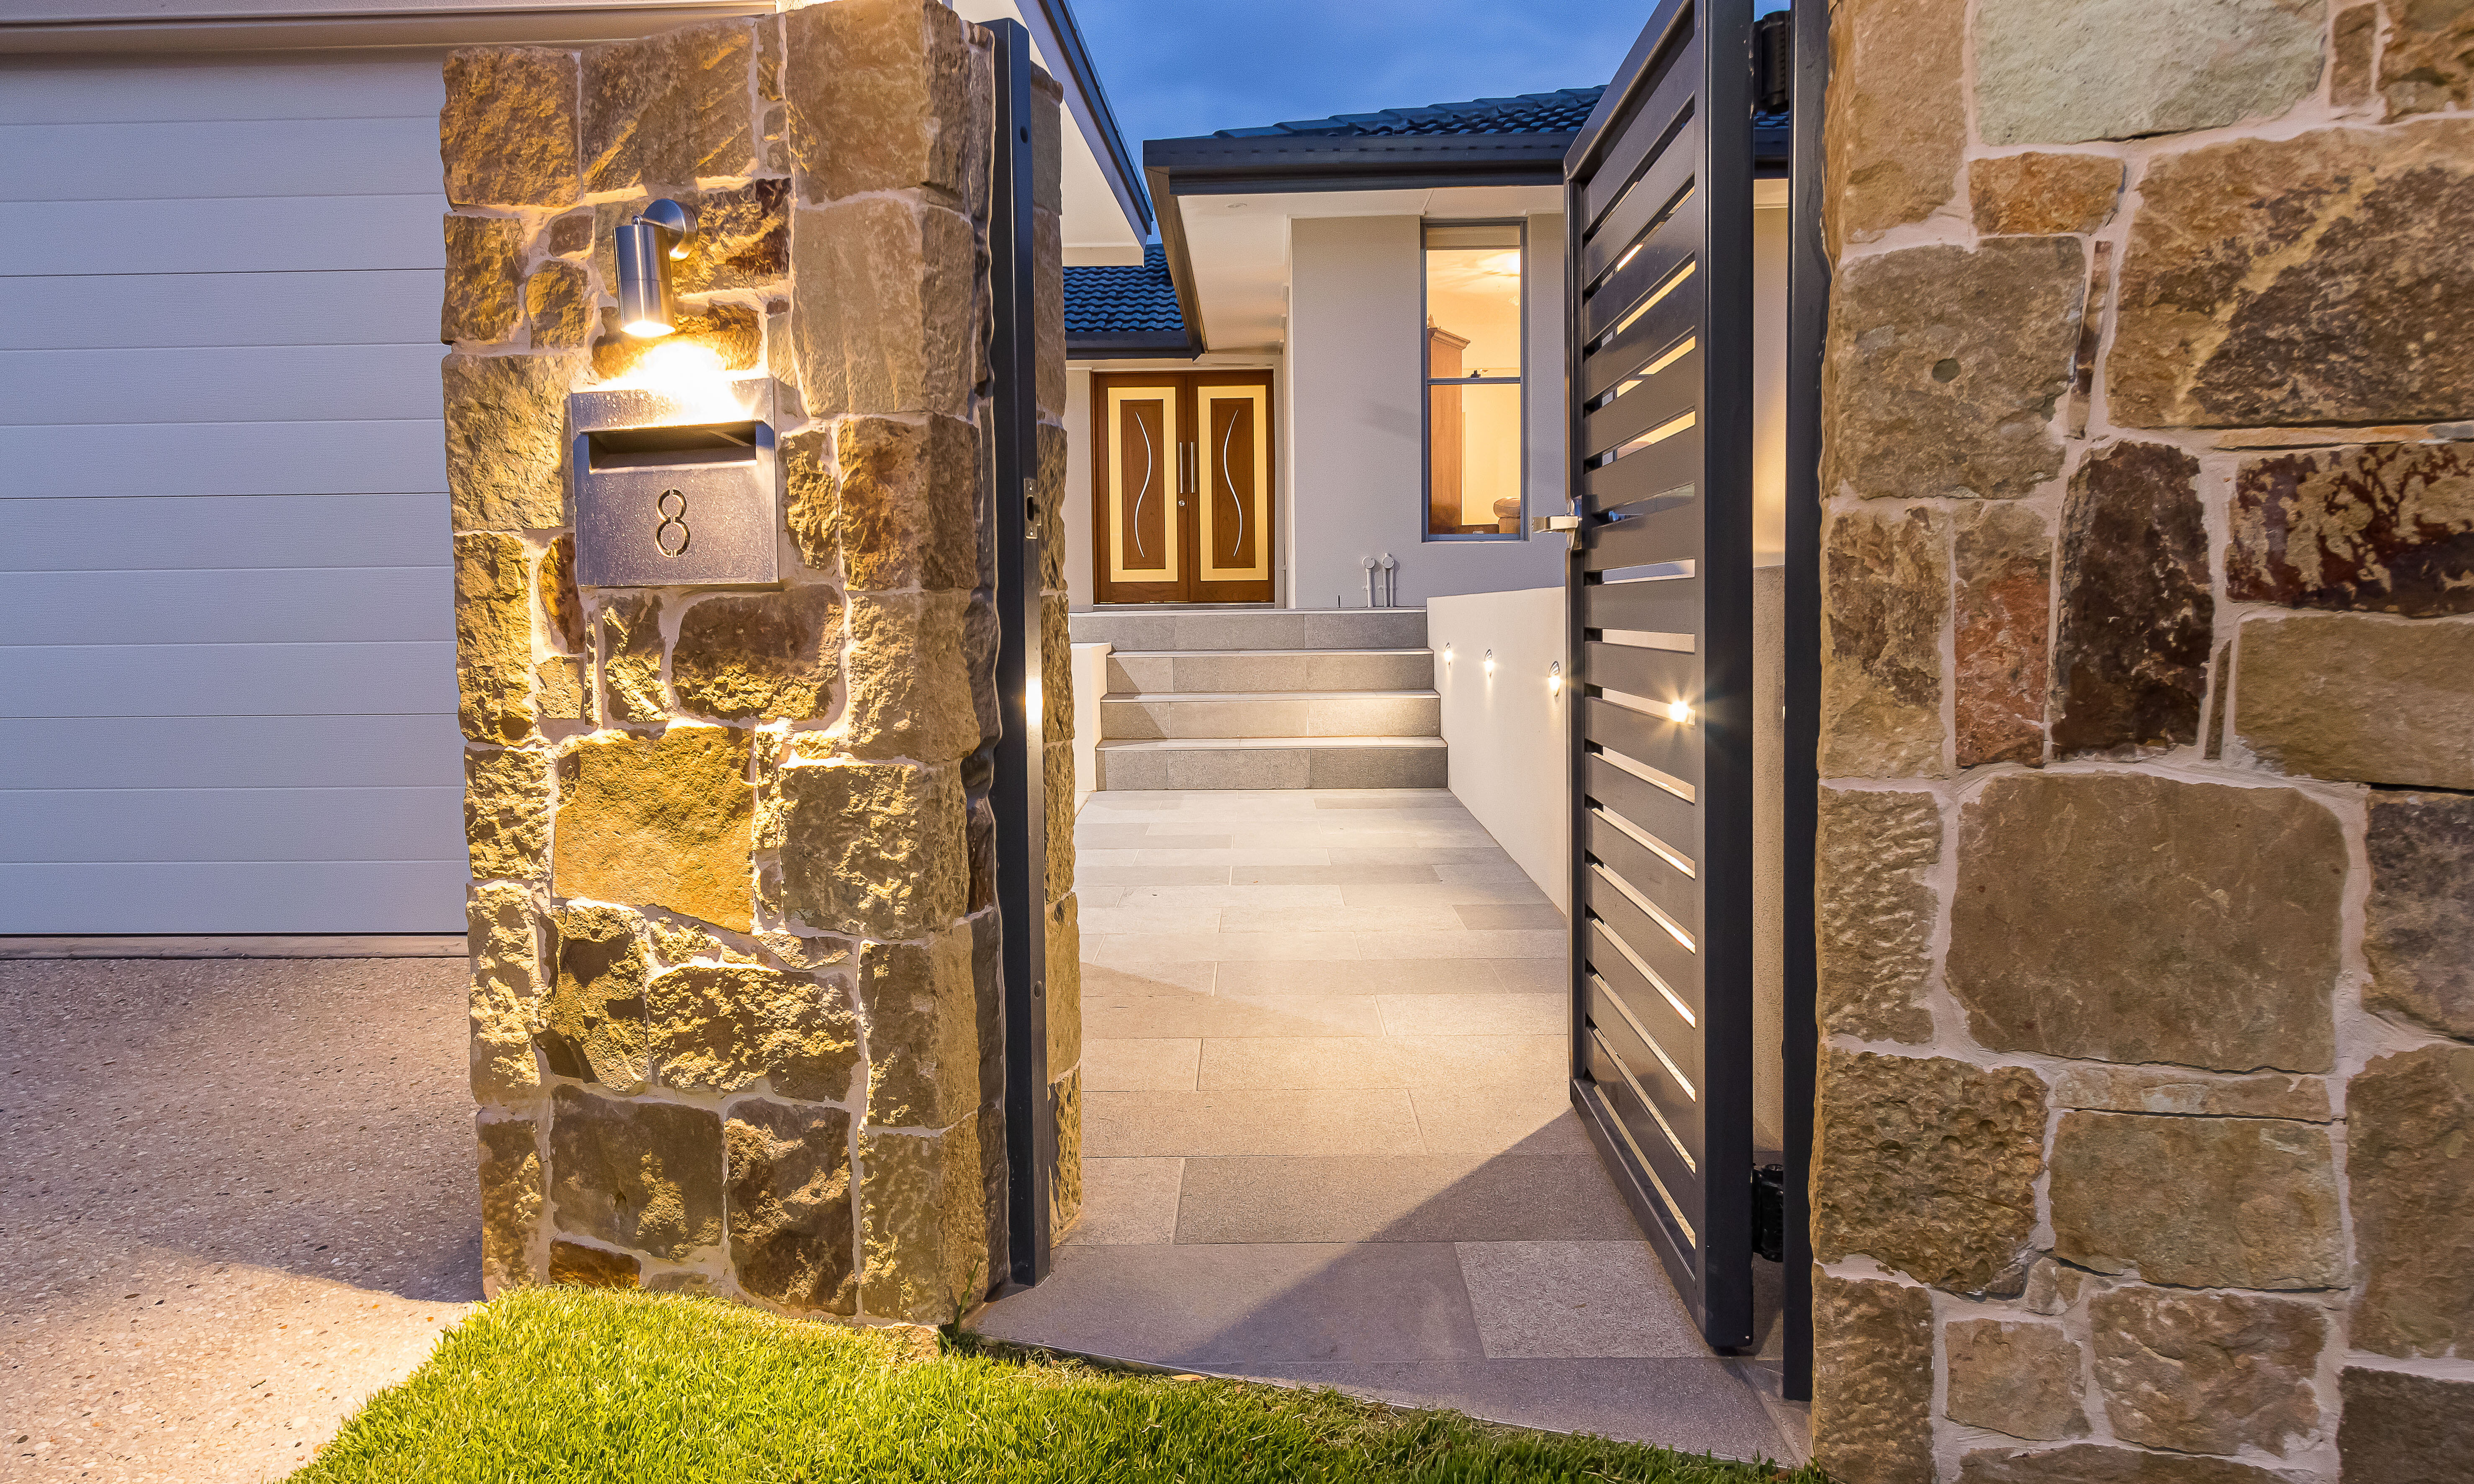 Clancy wall cladding and magma rock feature tiles at entry